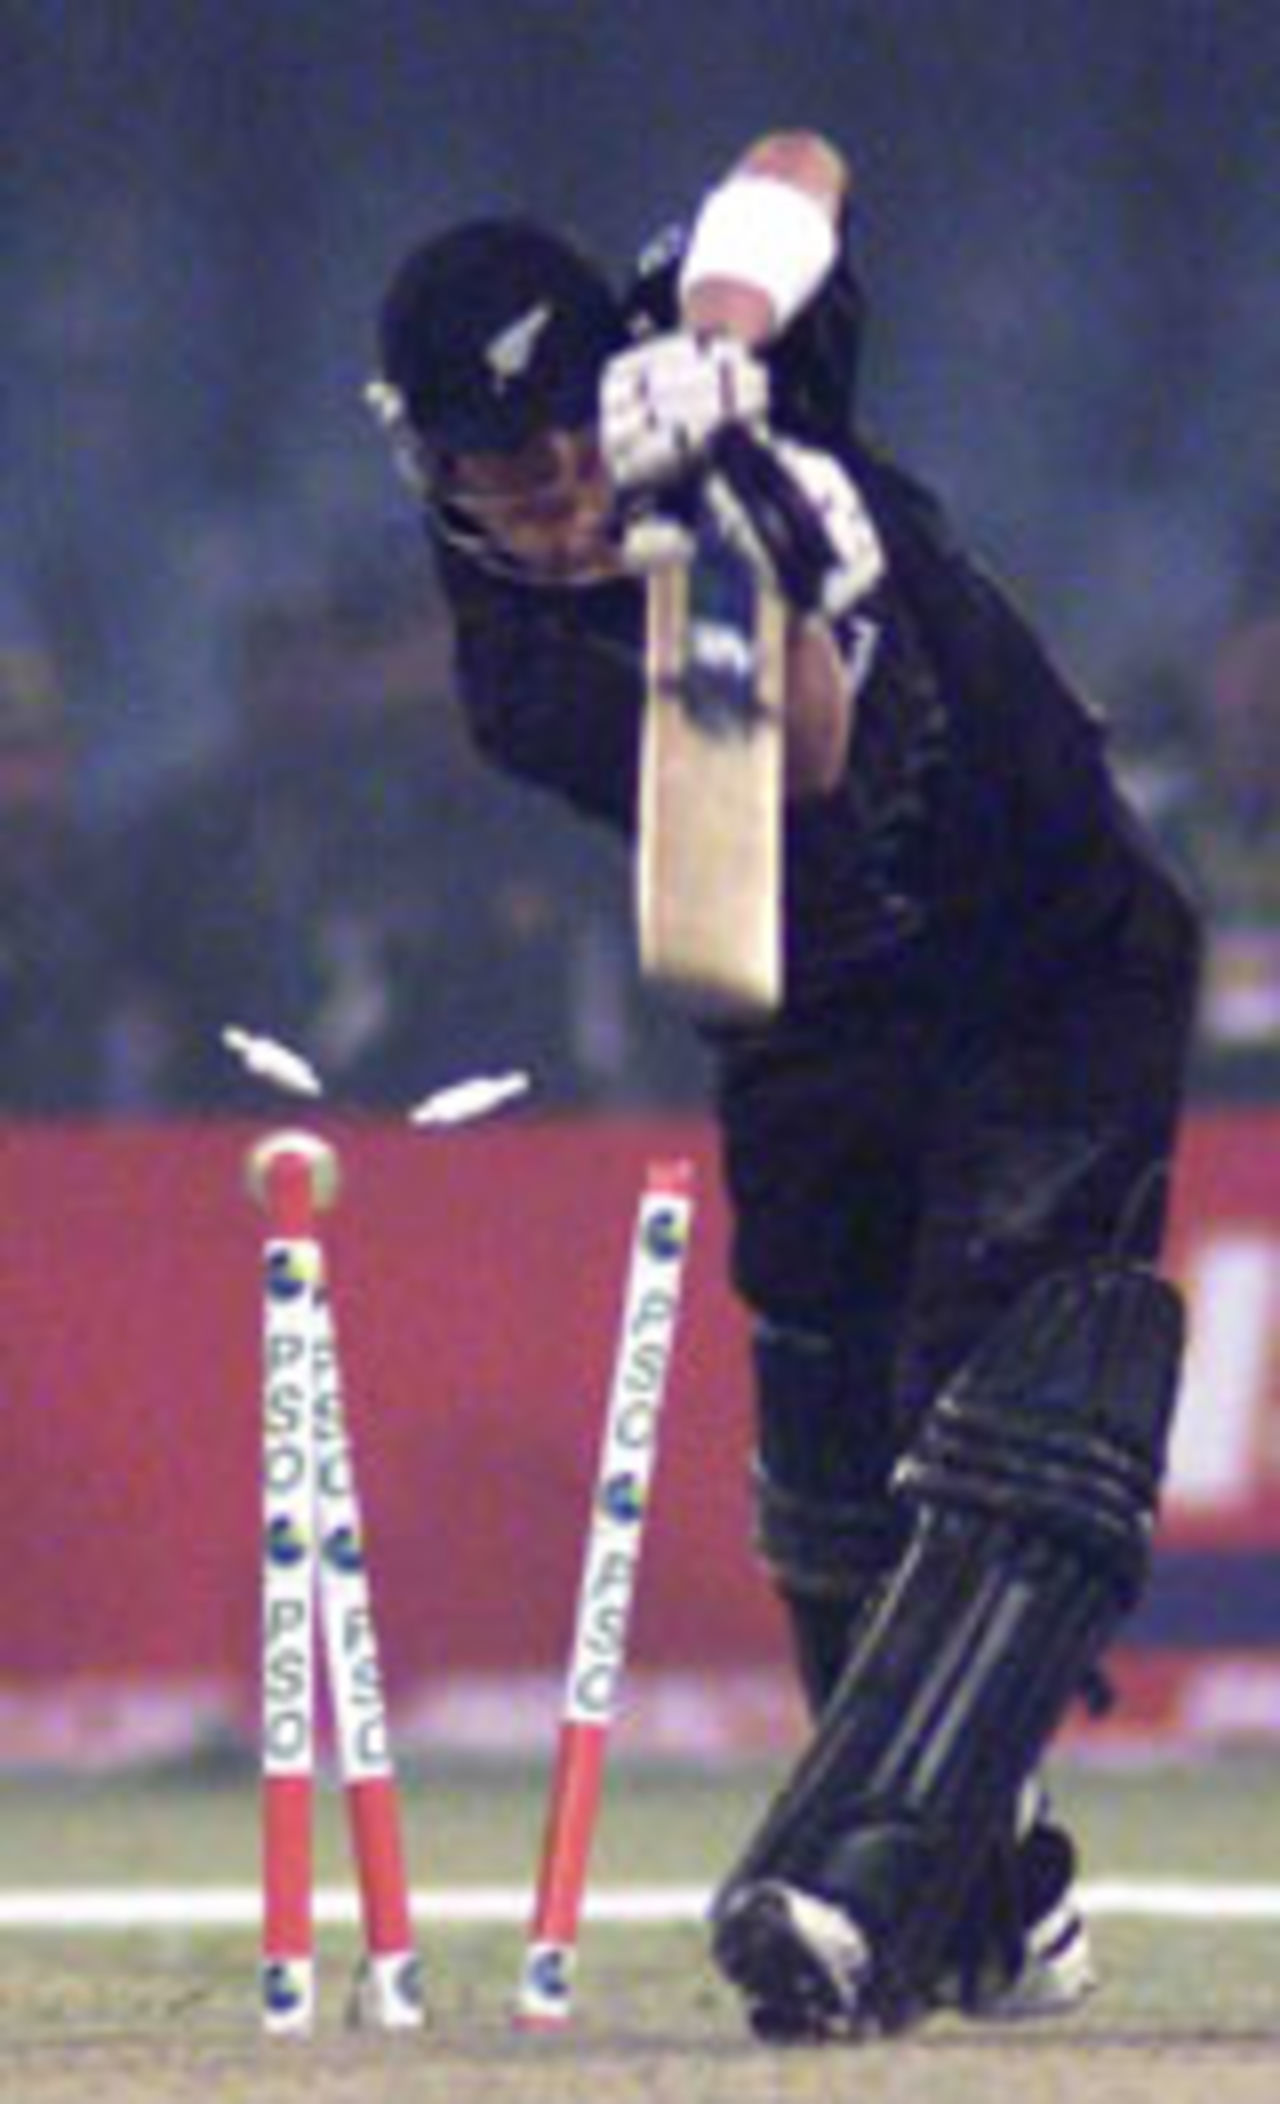 Paul Hitchcock bowled by Mohammad Sami during his 5 for 10 spell, Pakistan v New Zealand, 2nd ODI, Lahore, December 1, 2003.